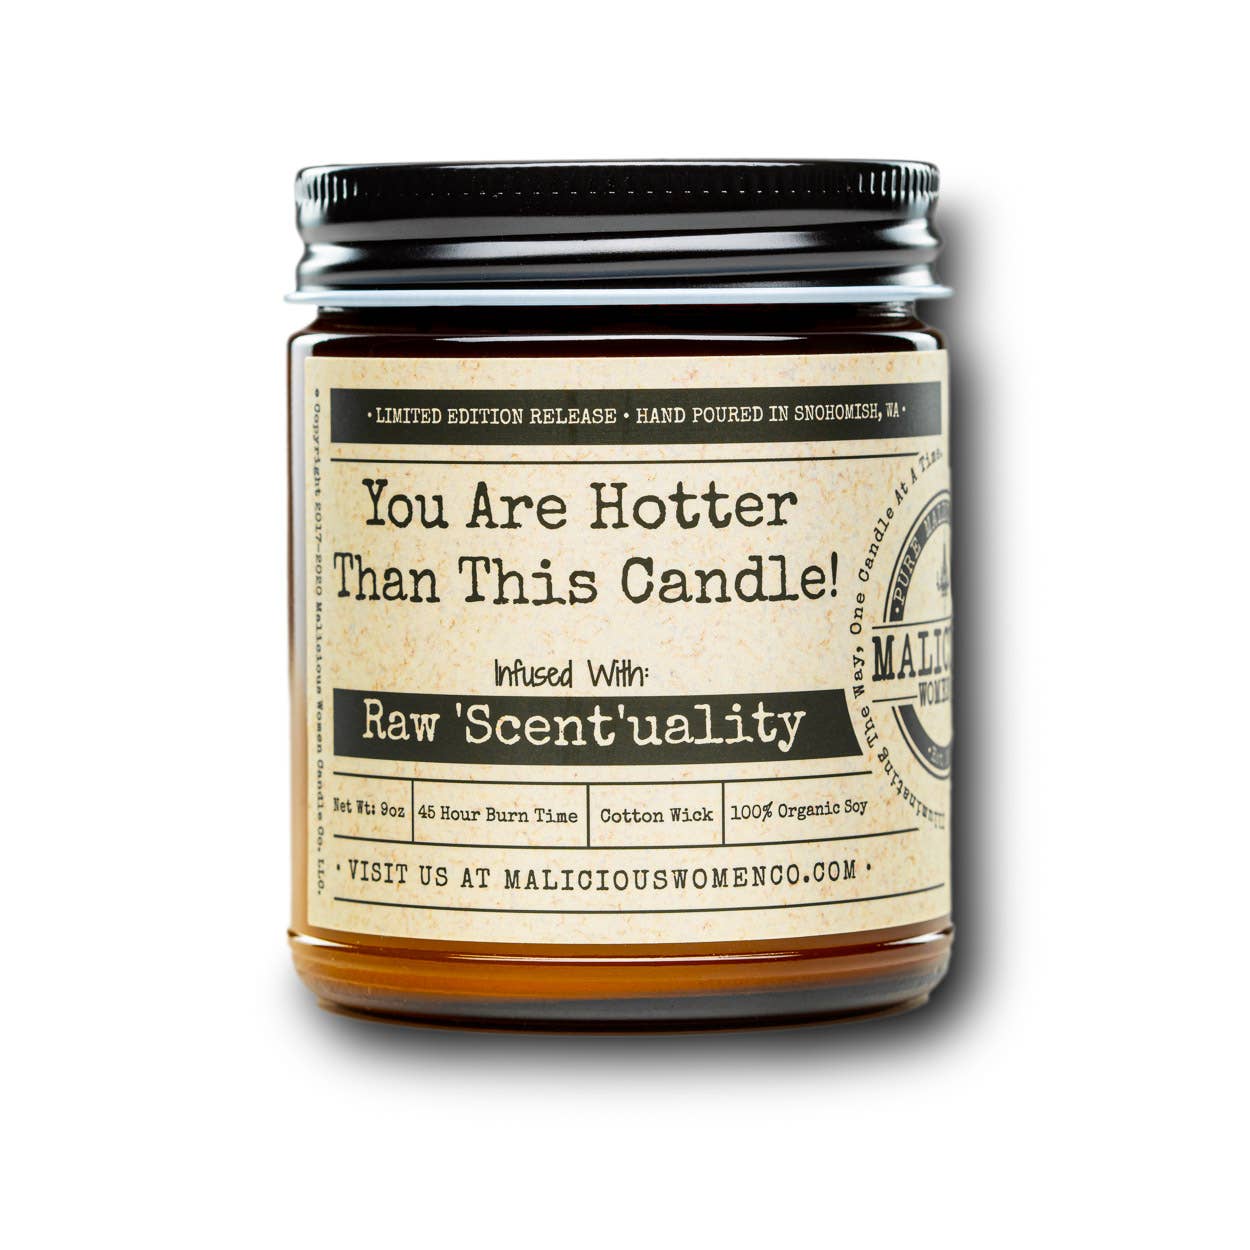 You Are Hotter Than This Candle! -  " Raw 'Sent'uality " - Malicious Women Candle Co